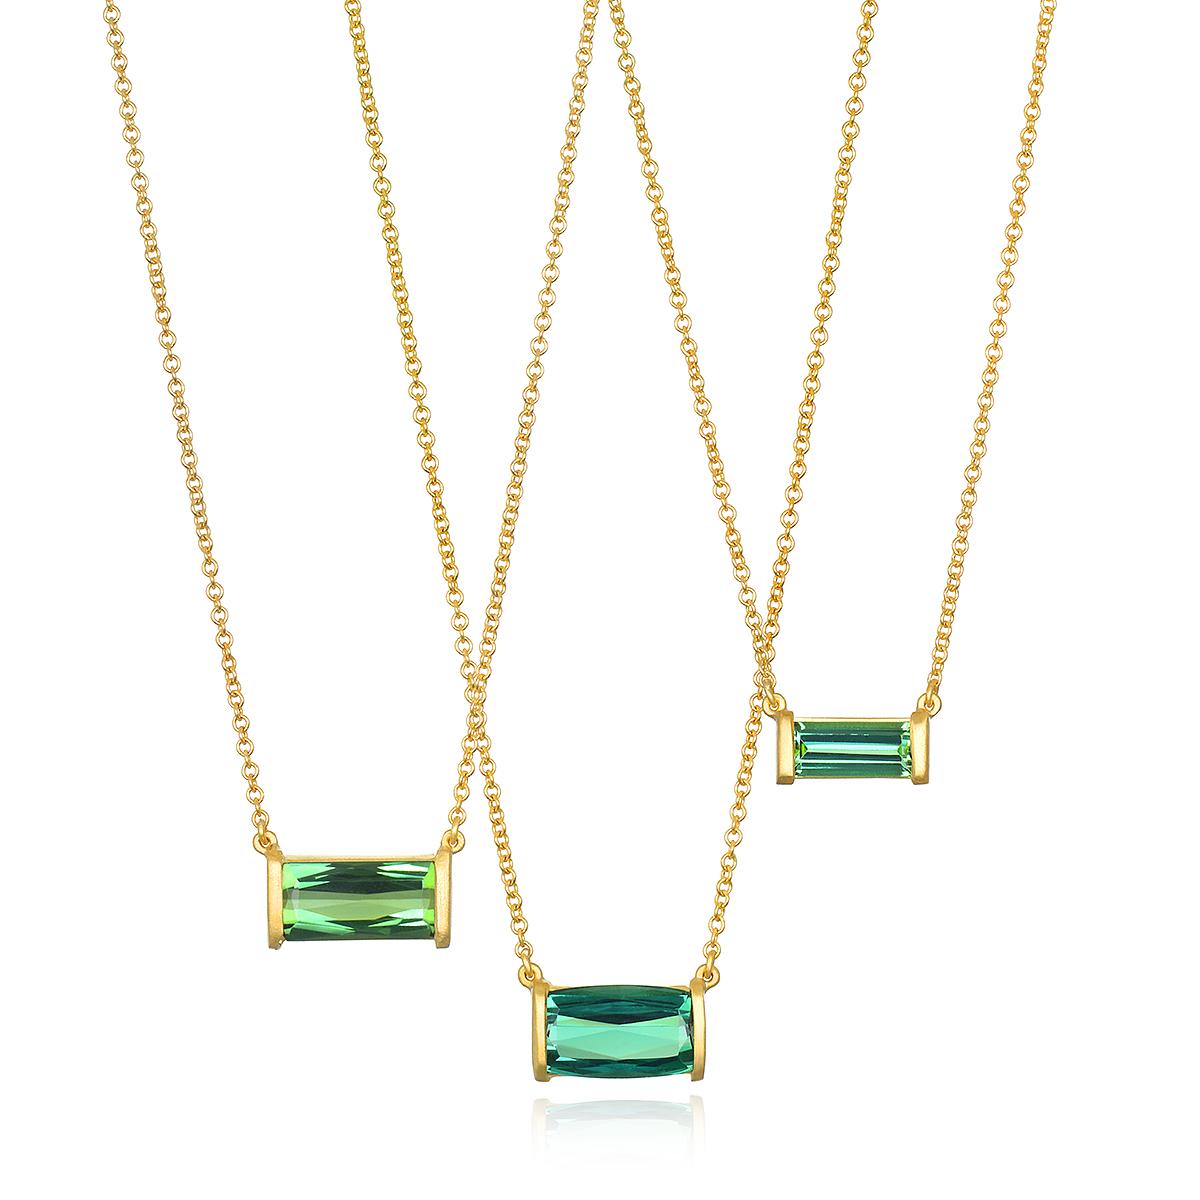 Faye Kim's 18K Gold Bar Set French Cut Green Tourmaline Necklace features a striking, vibrantly-hued gemstone set in a matte gold finish; certain to add sparkle to any wardrobe and can be worn alone or layered with other necklaces. 

Green